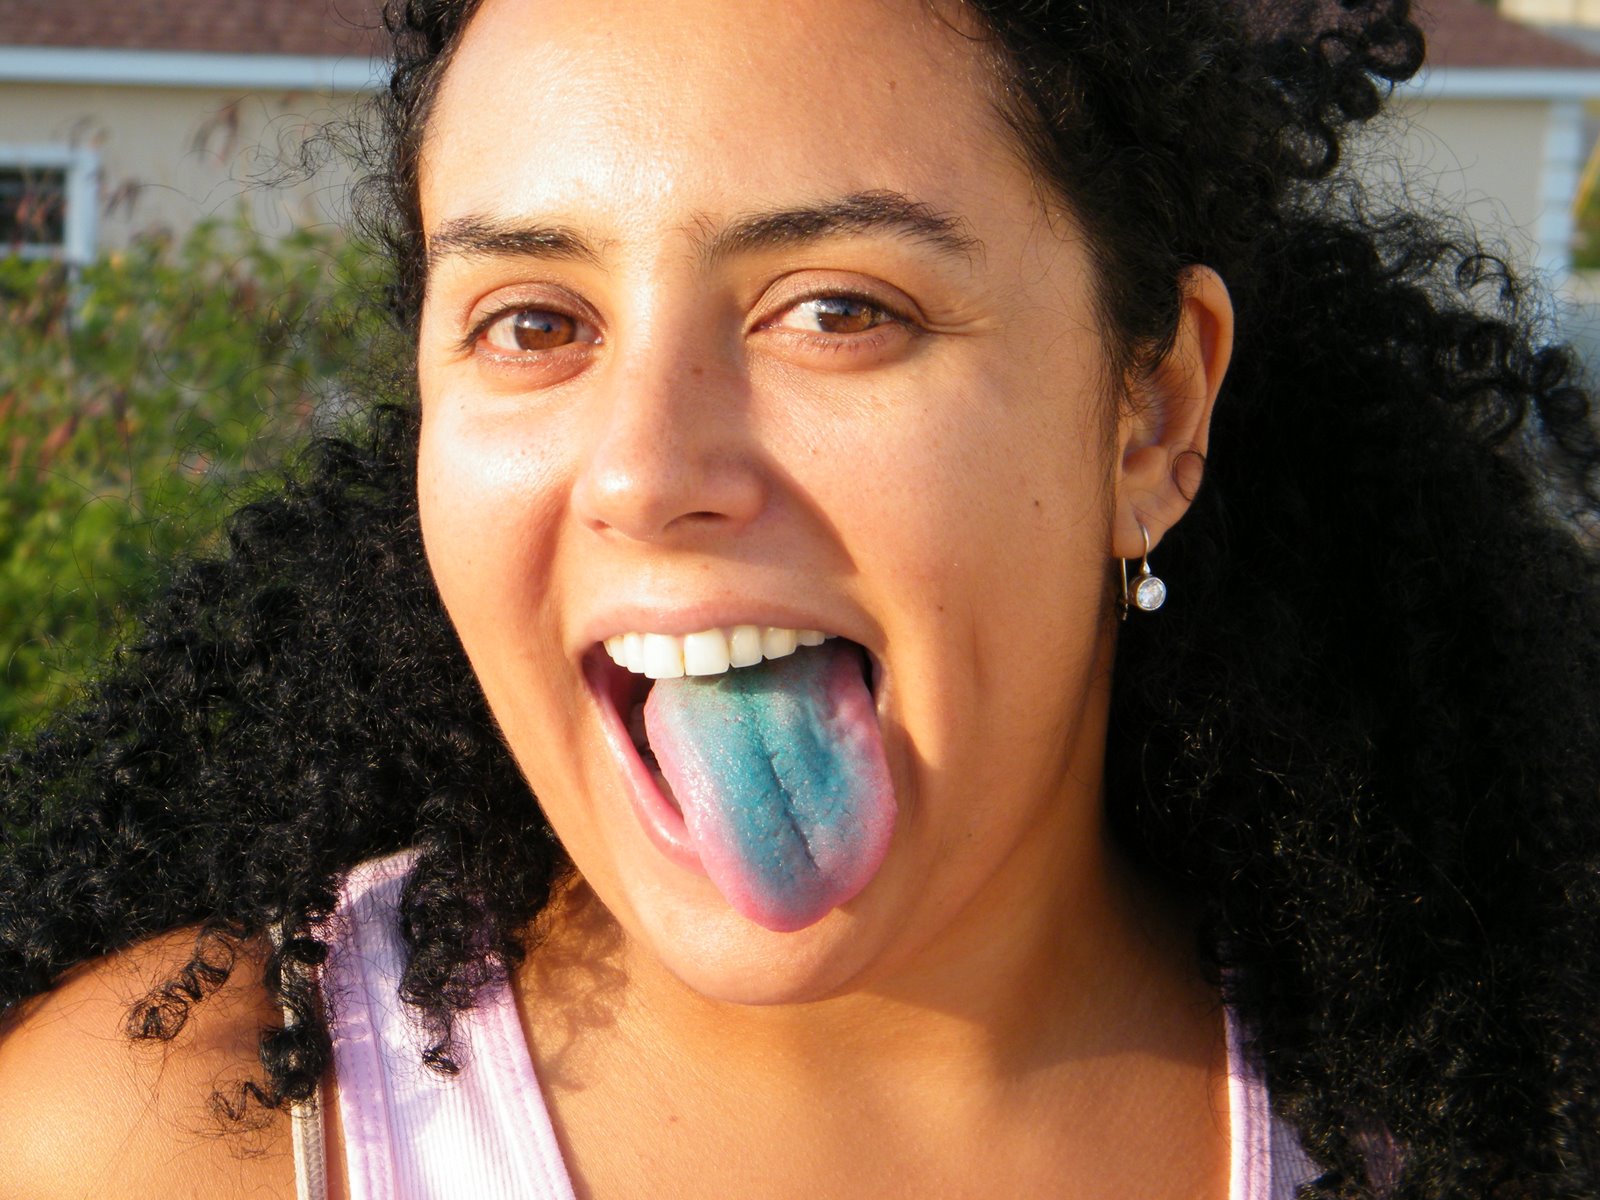 ...and suddenly, I noticed a strange discoloration on the OI Girls tongue. 